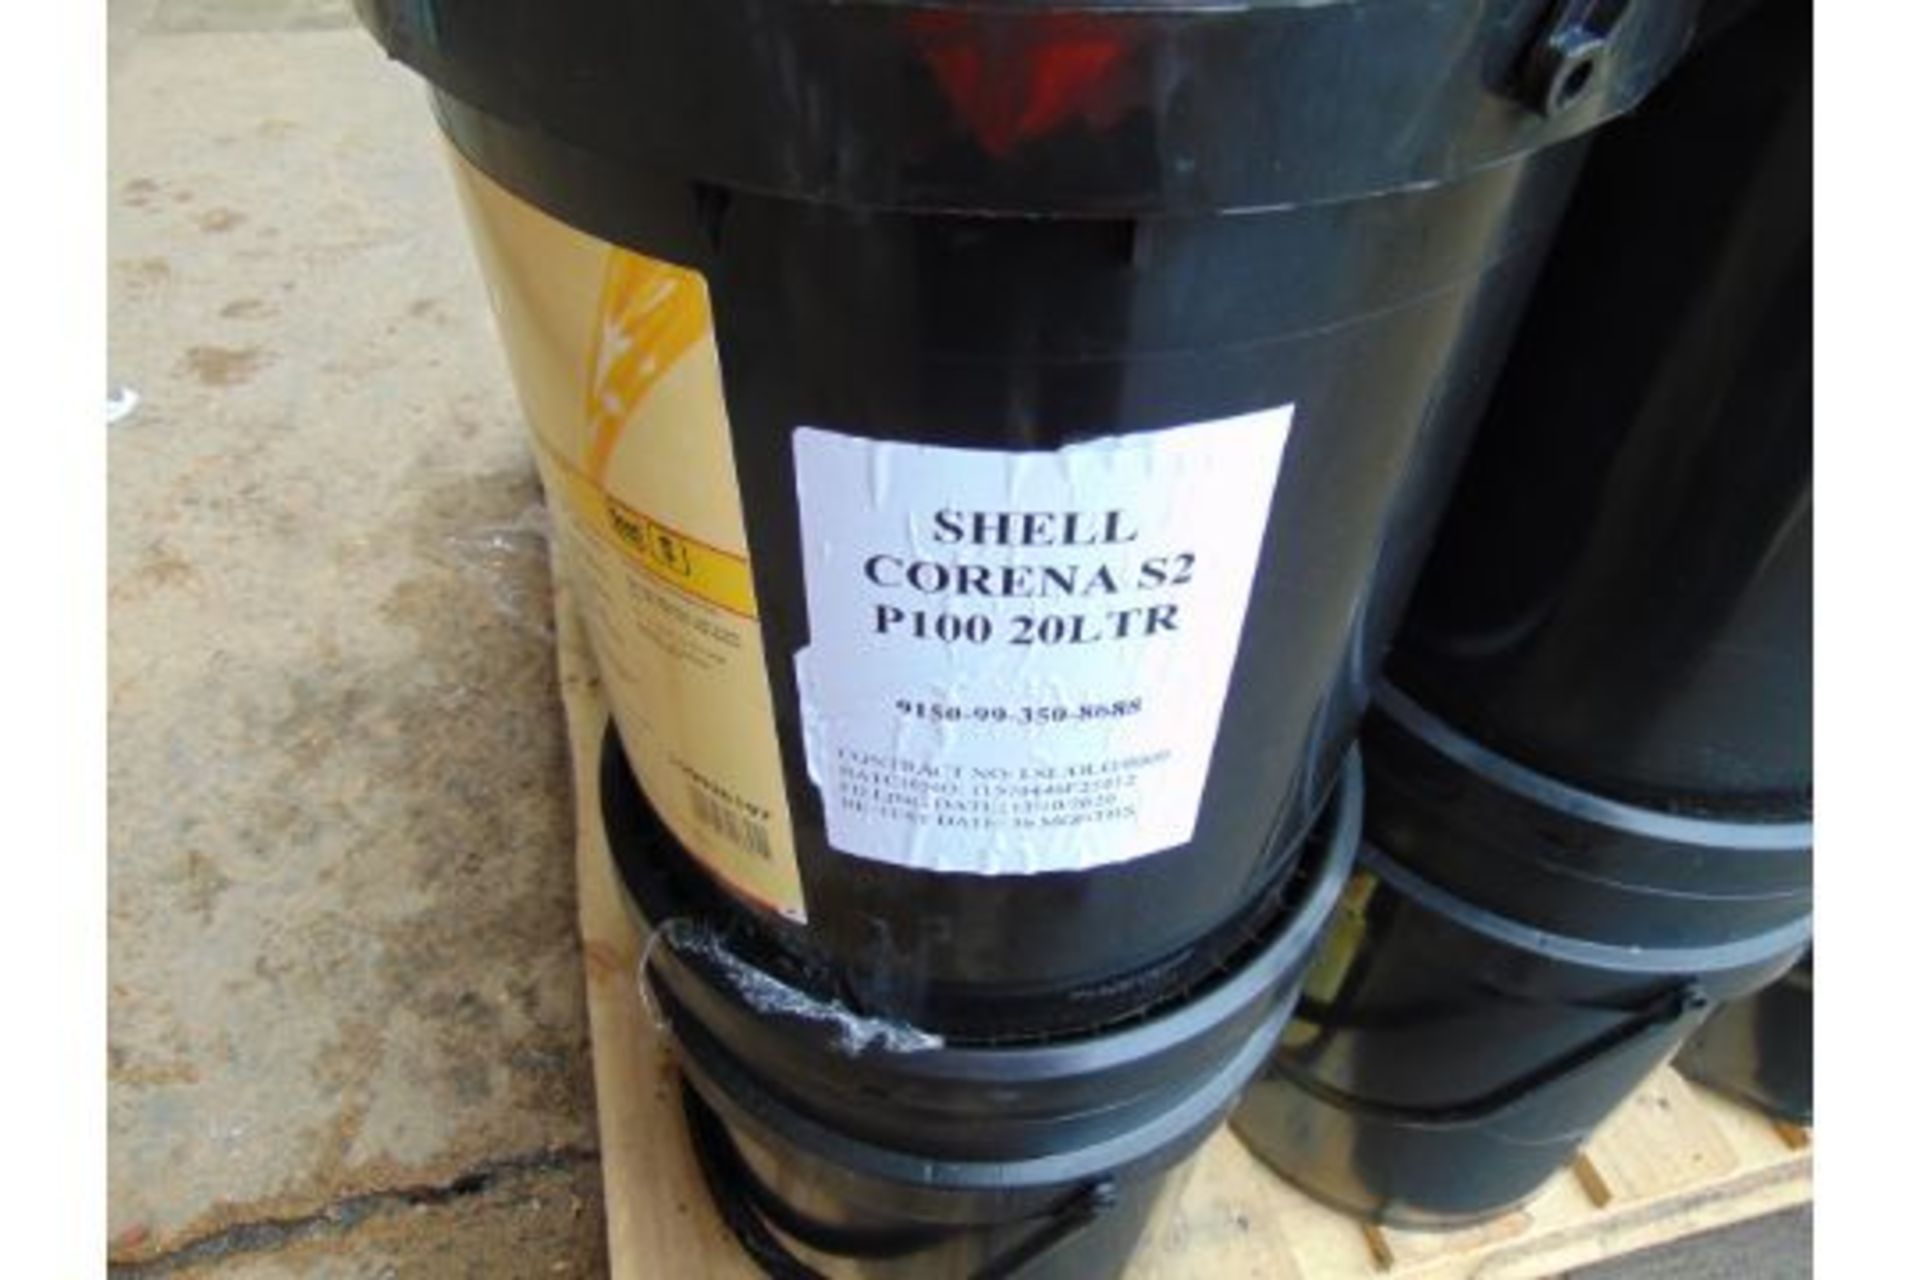 10 x 20 Litre Drums of Shell Corena S2 P100 High Quality Lubricating Oil - Image 3 of 4